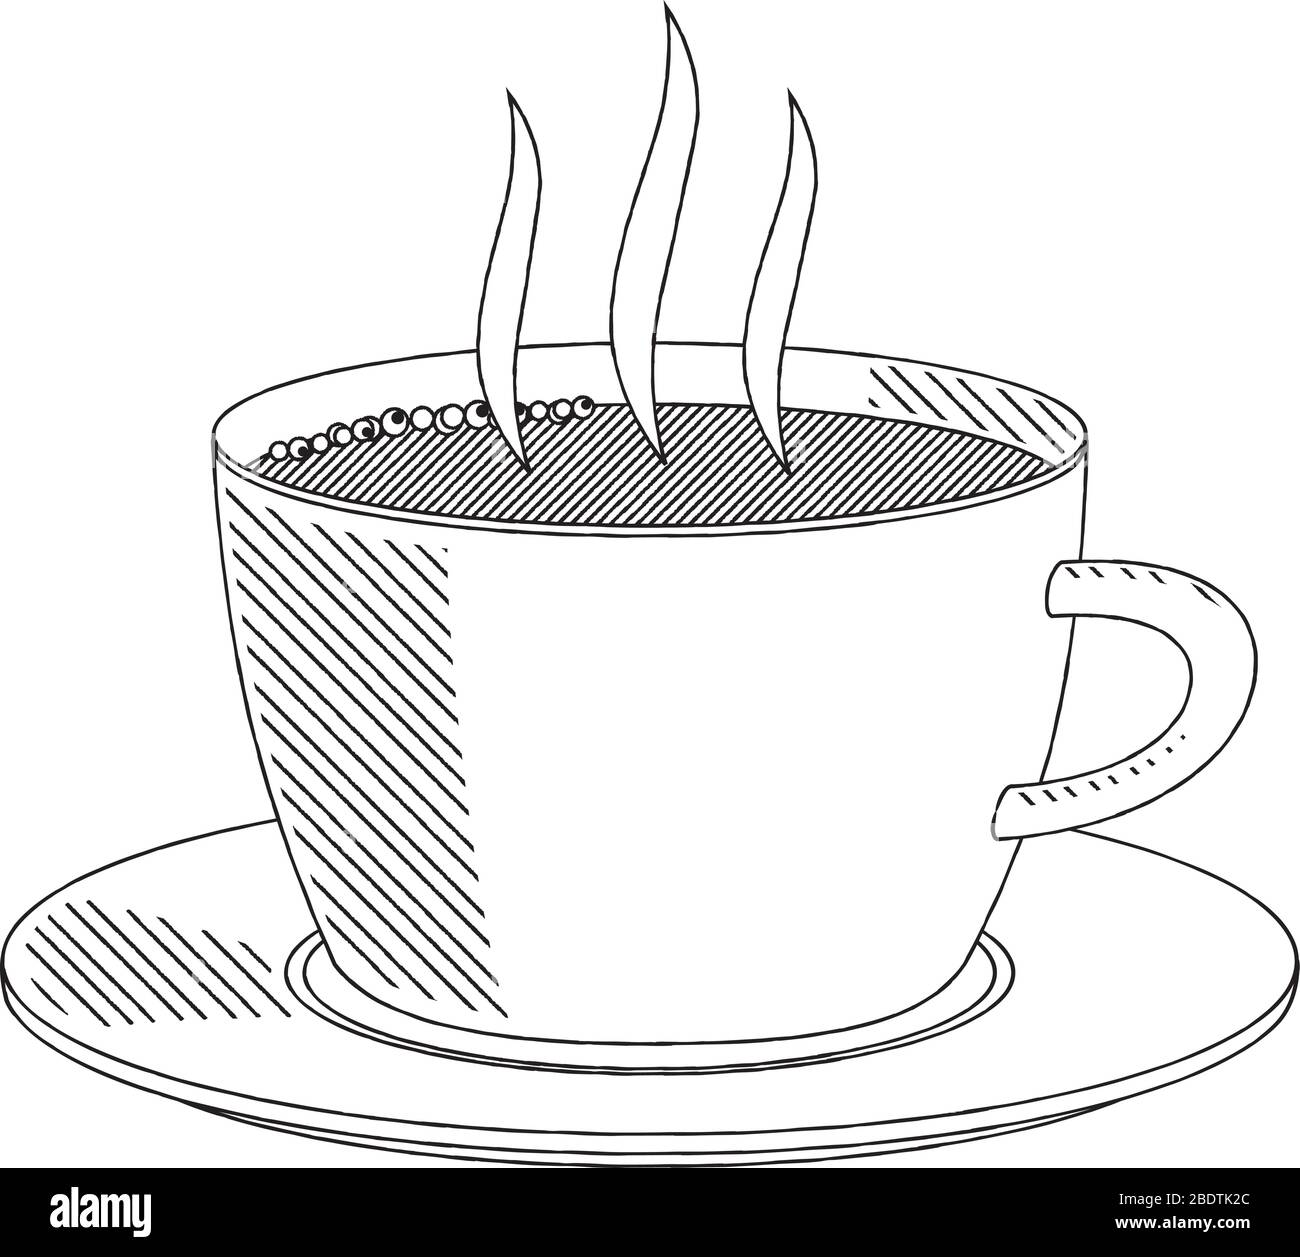 Coffee cup/ tea cup - black and white illustration/ drawing Stock ...